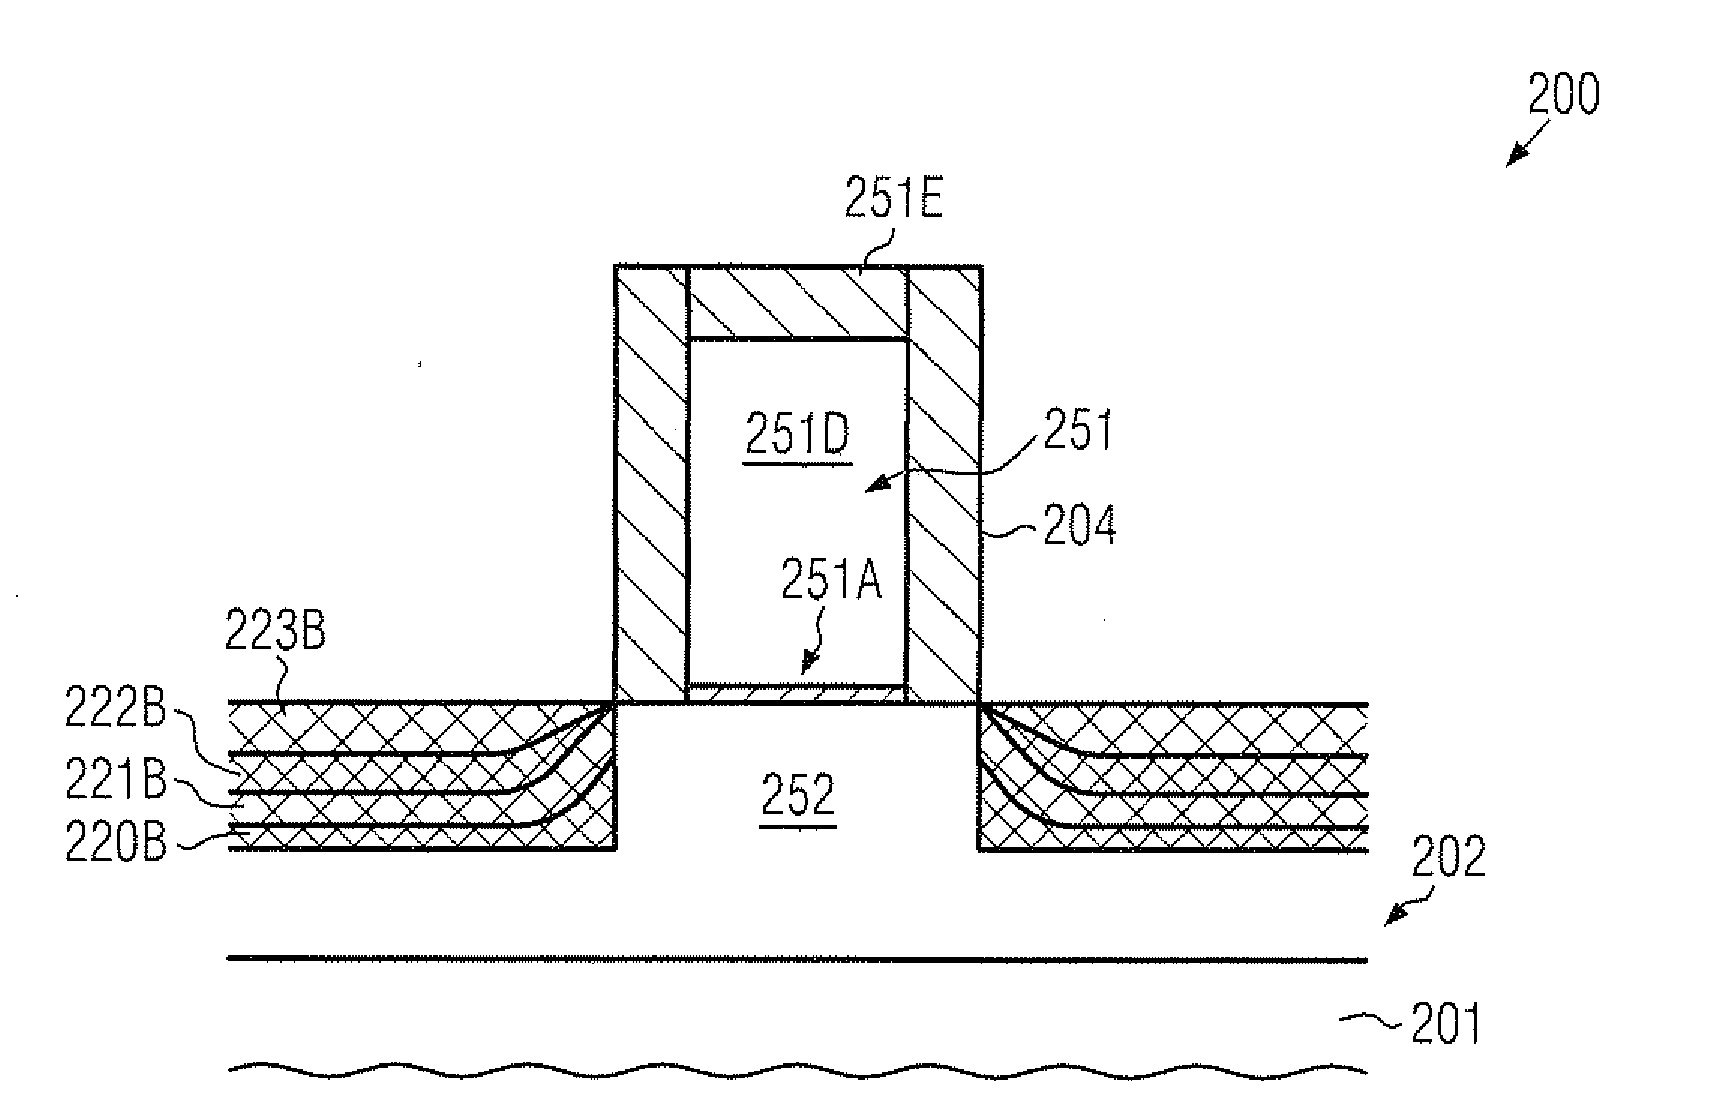 Adjusting of a non-silicon fraction in a semiconductor alloy during transistor fabrication by an intermediate oxidation process